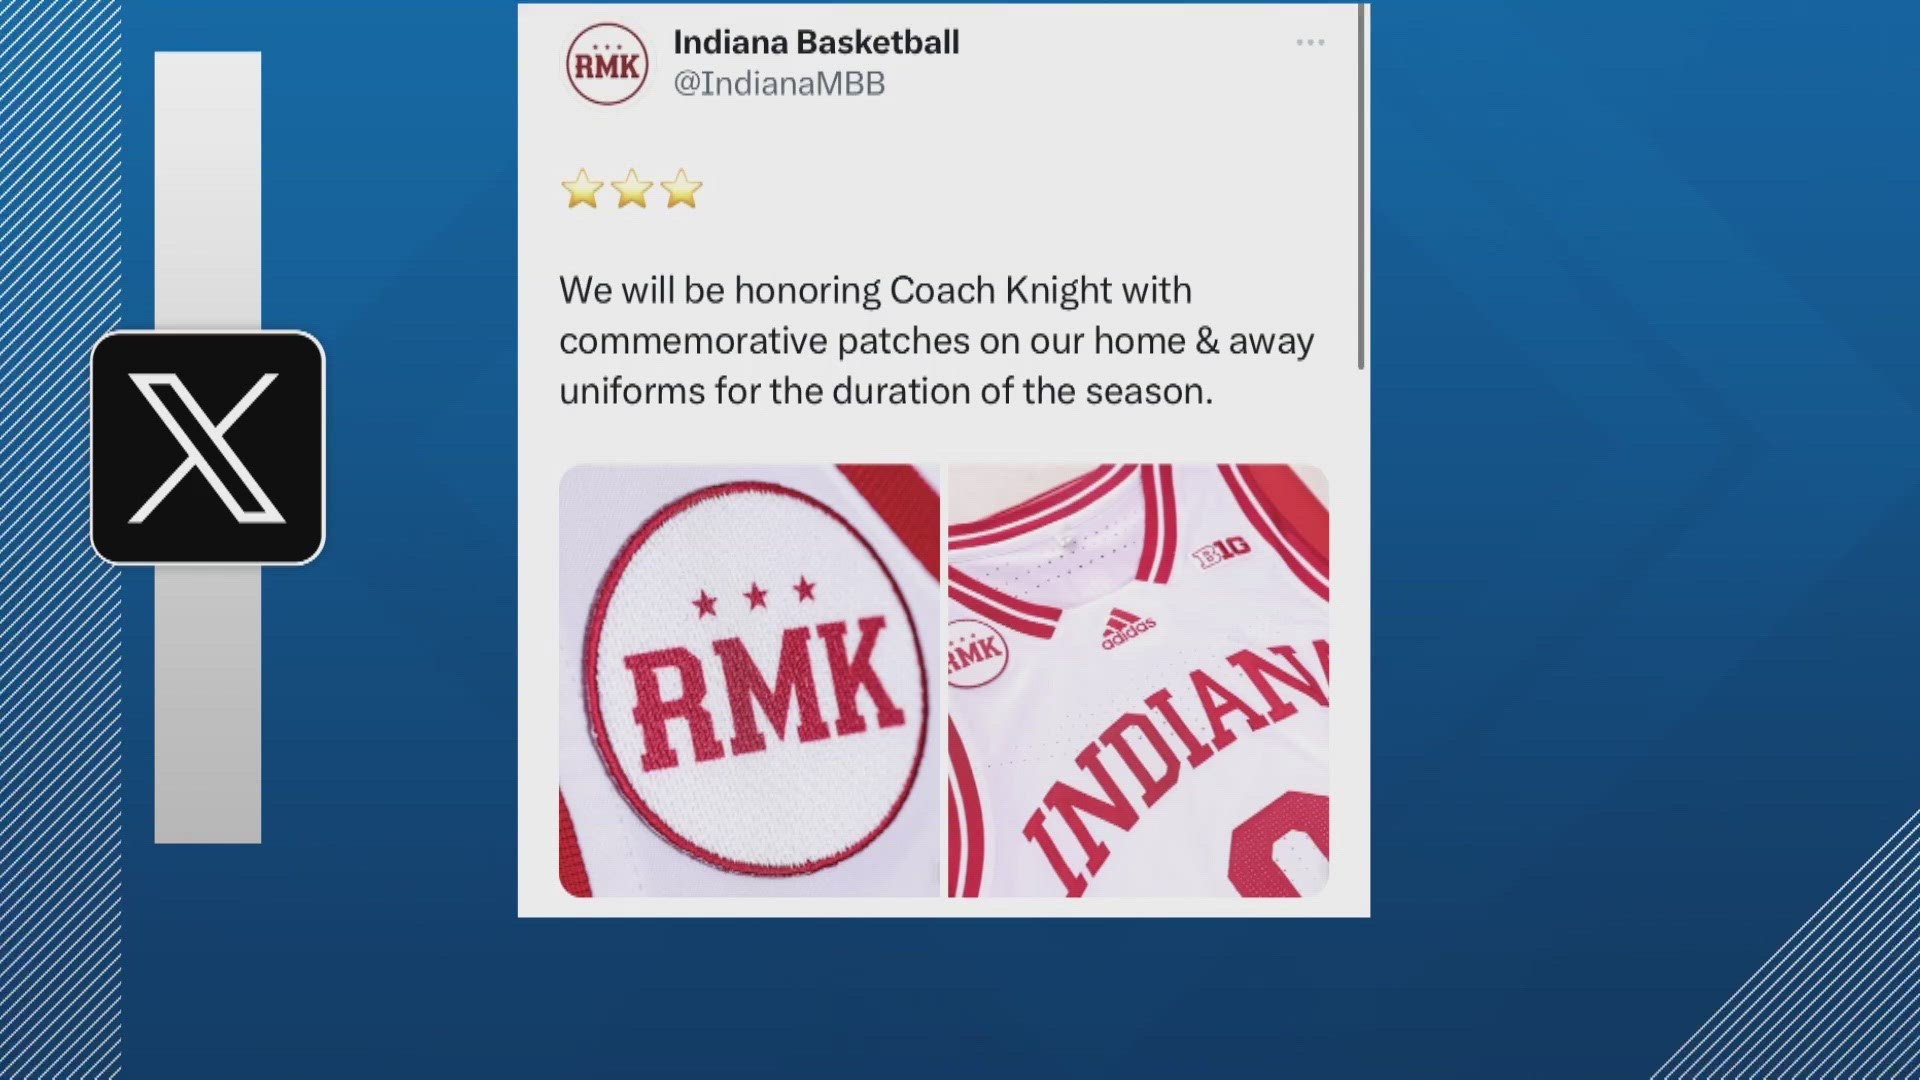 13Sports reporter Dominic Miranda reports from Assembly Hall where the IU men's basketball team unveiled patches they will wear this season to honor Bob Knight.